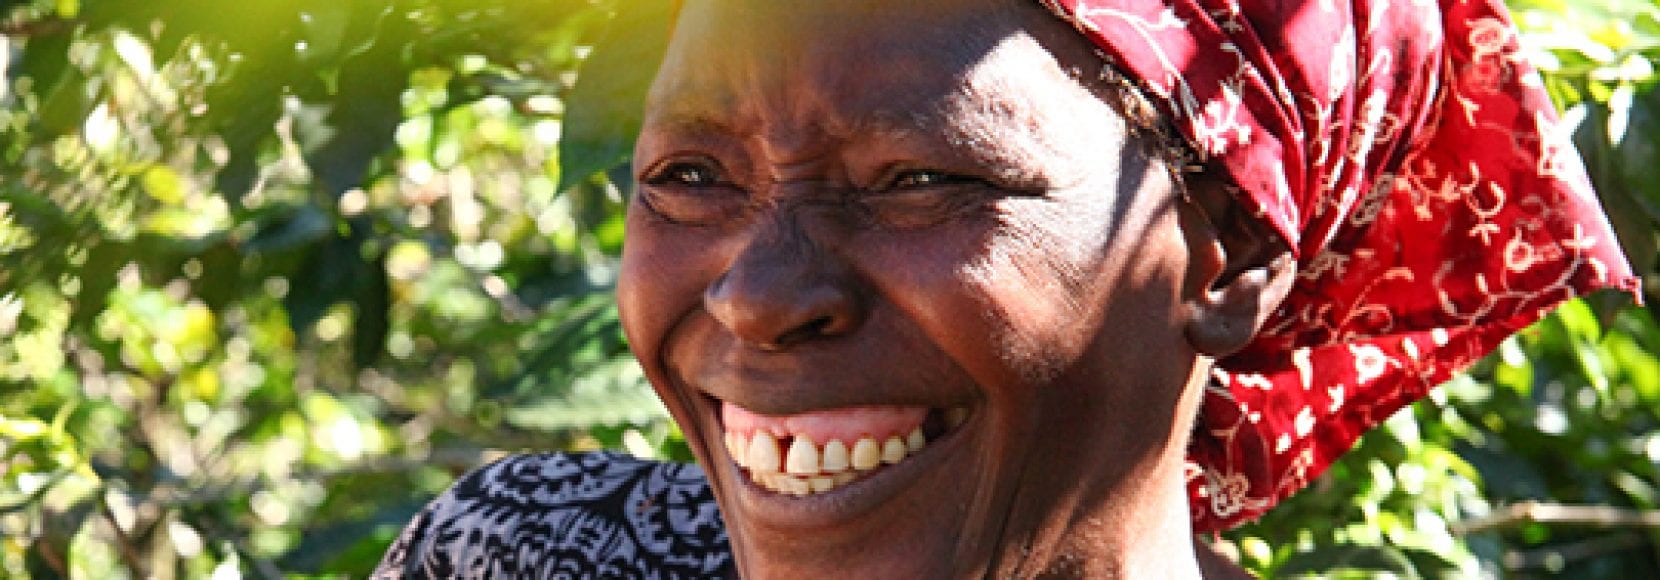 Woman smiling while working in Zimbabwe